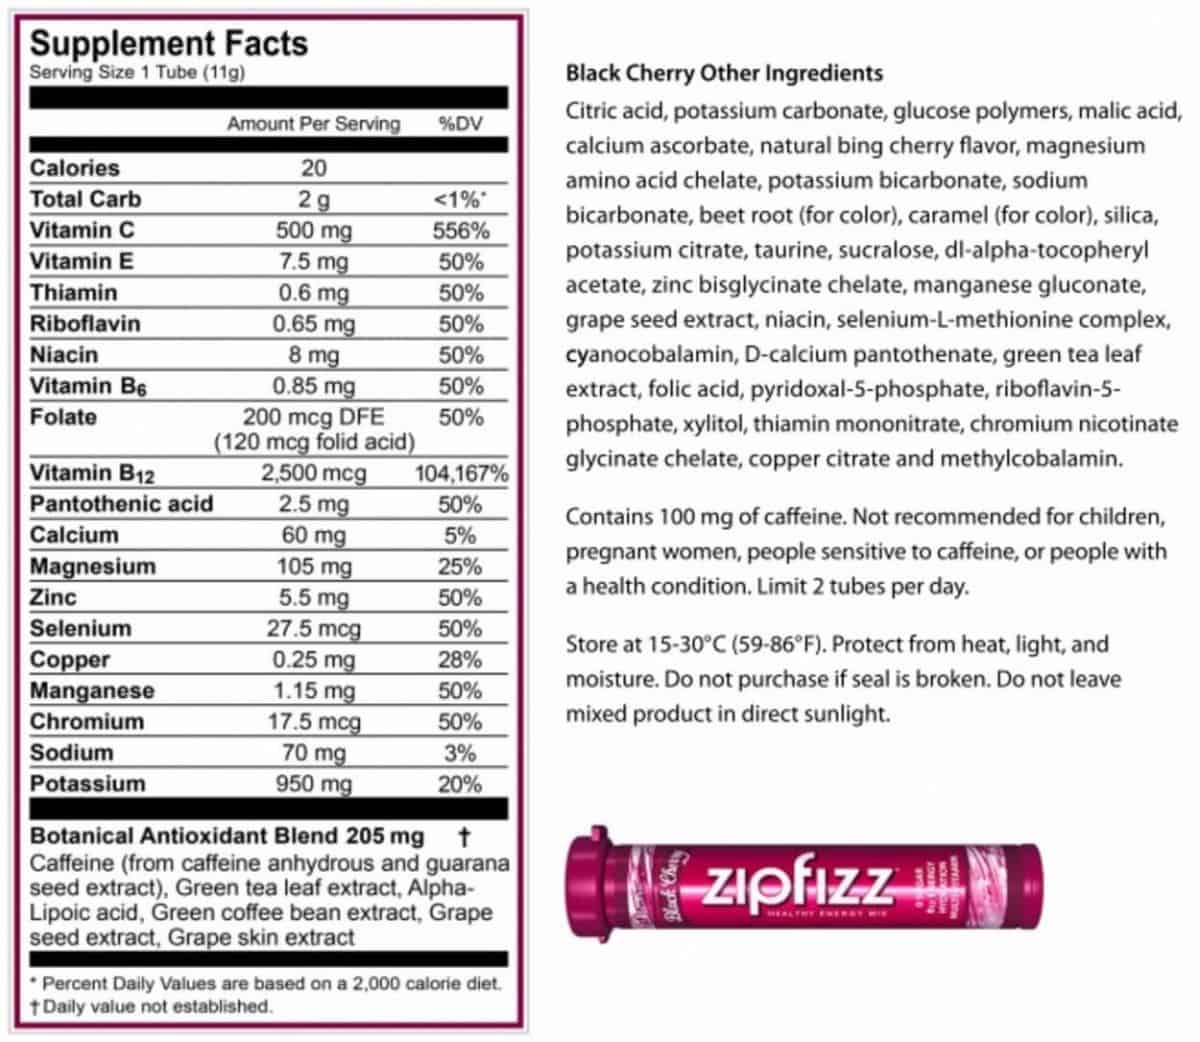 Nutrition facts and ingredients of Zipfizz energy drink